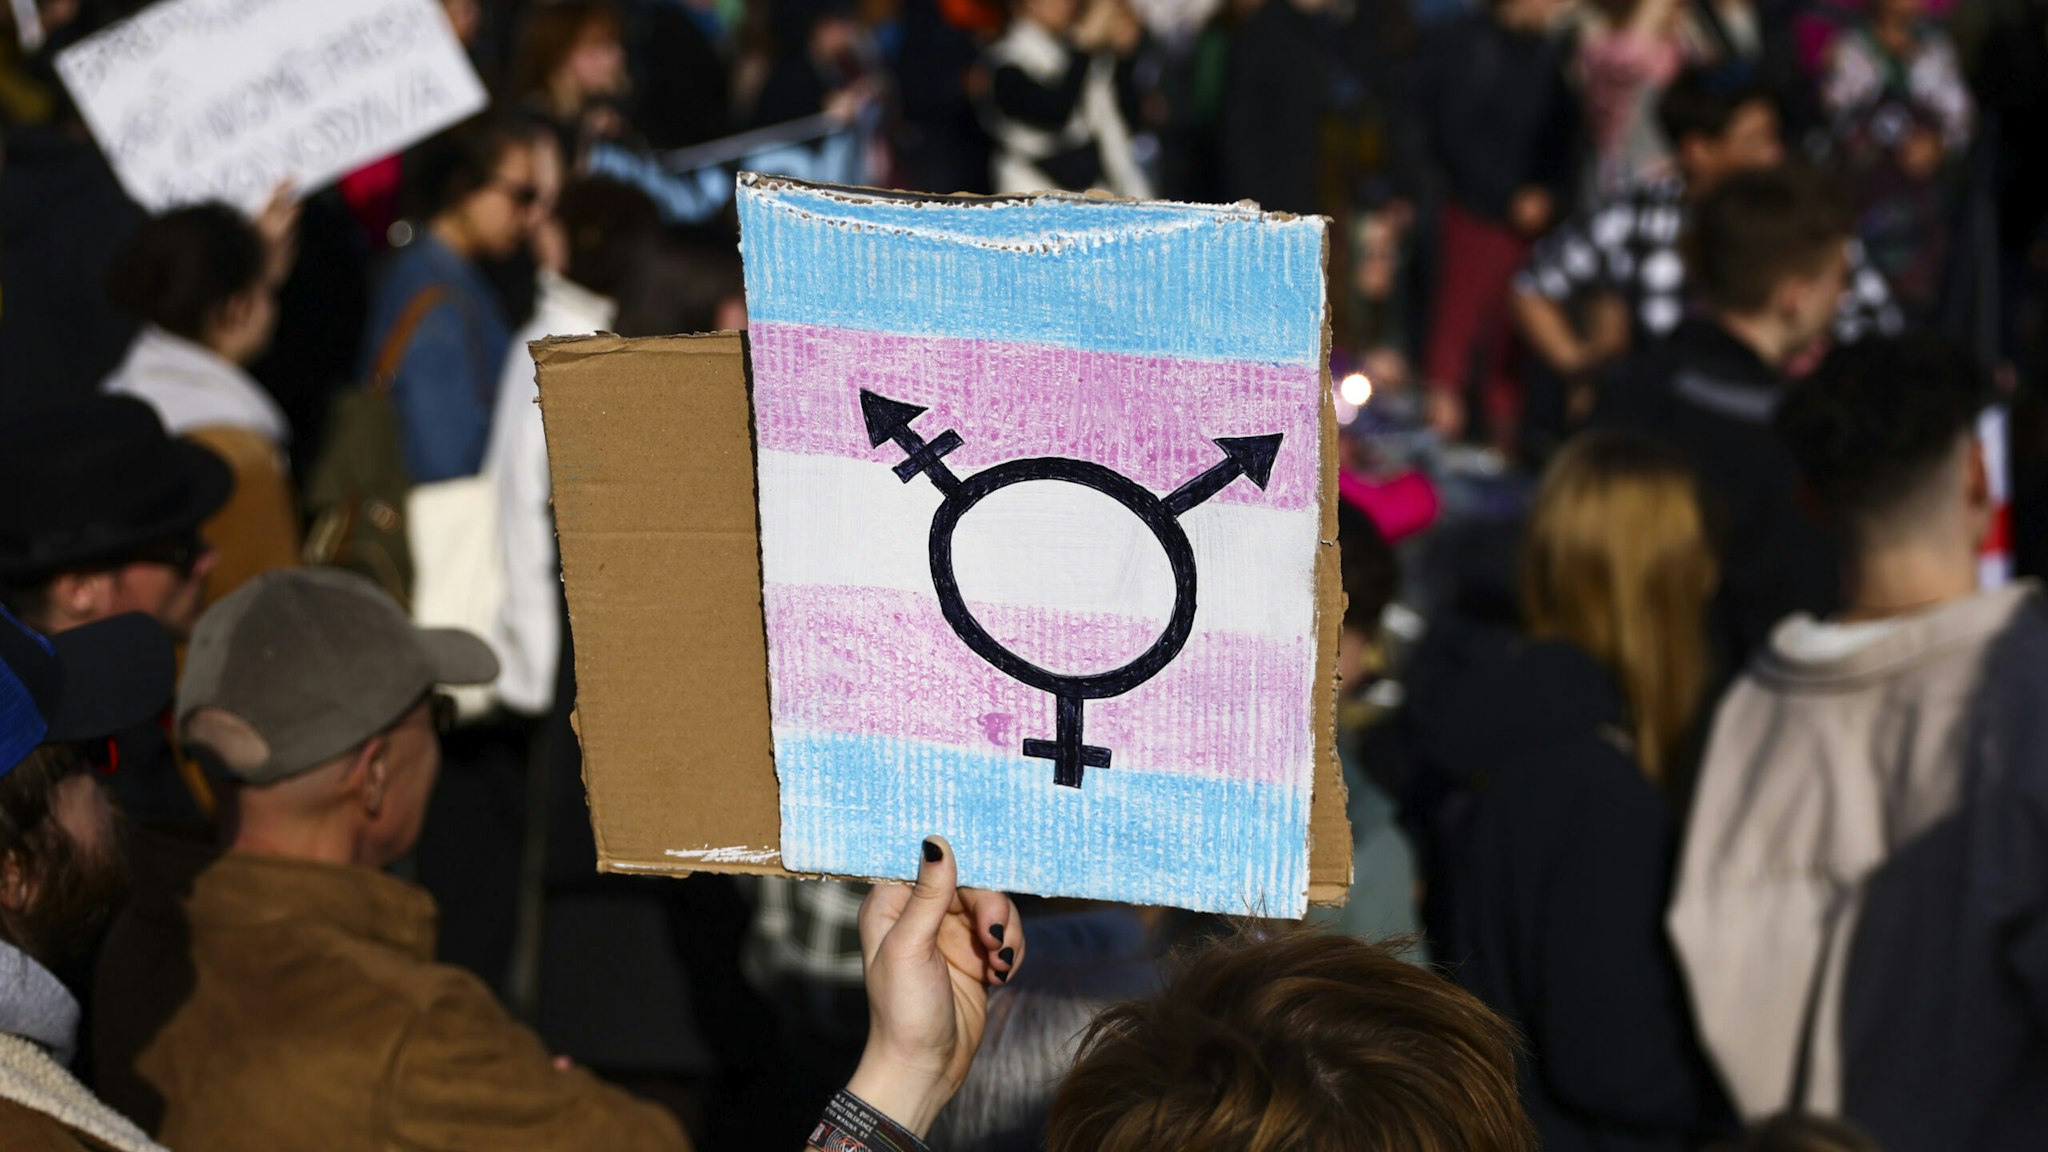 Transgender symbol is seen on a banner during an annual 'Manifa' march in Krakow, Poland on March 18, 2023.